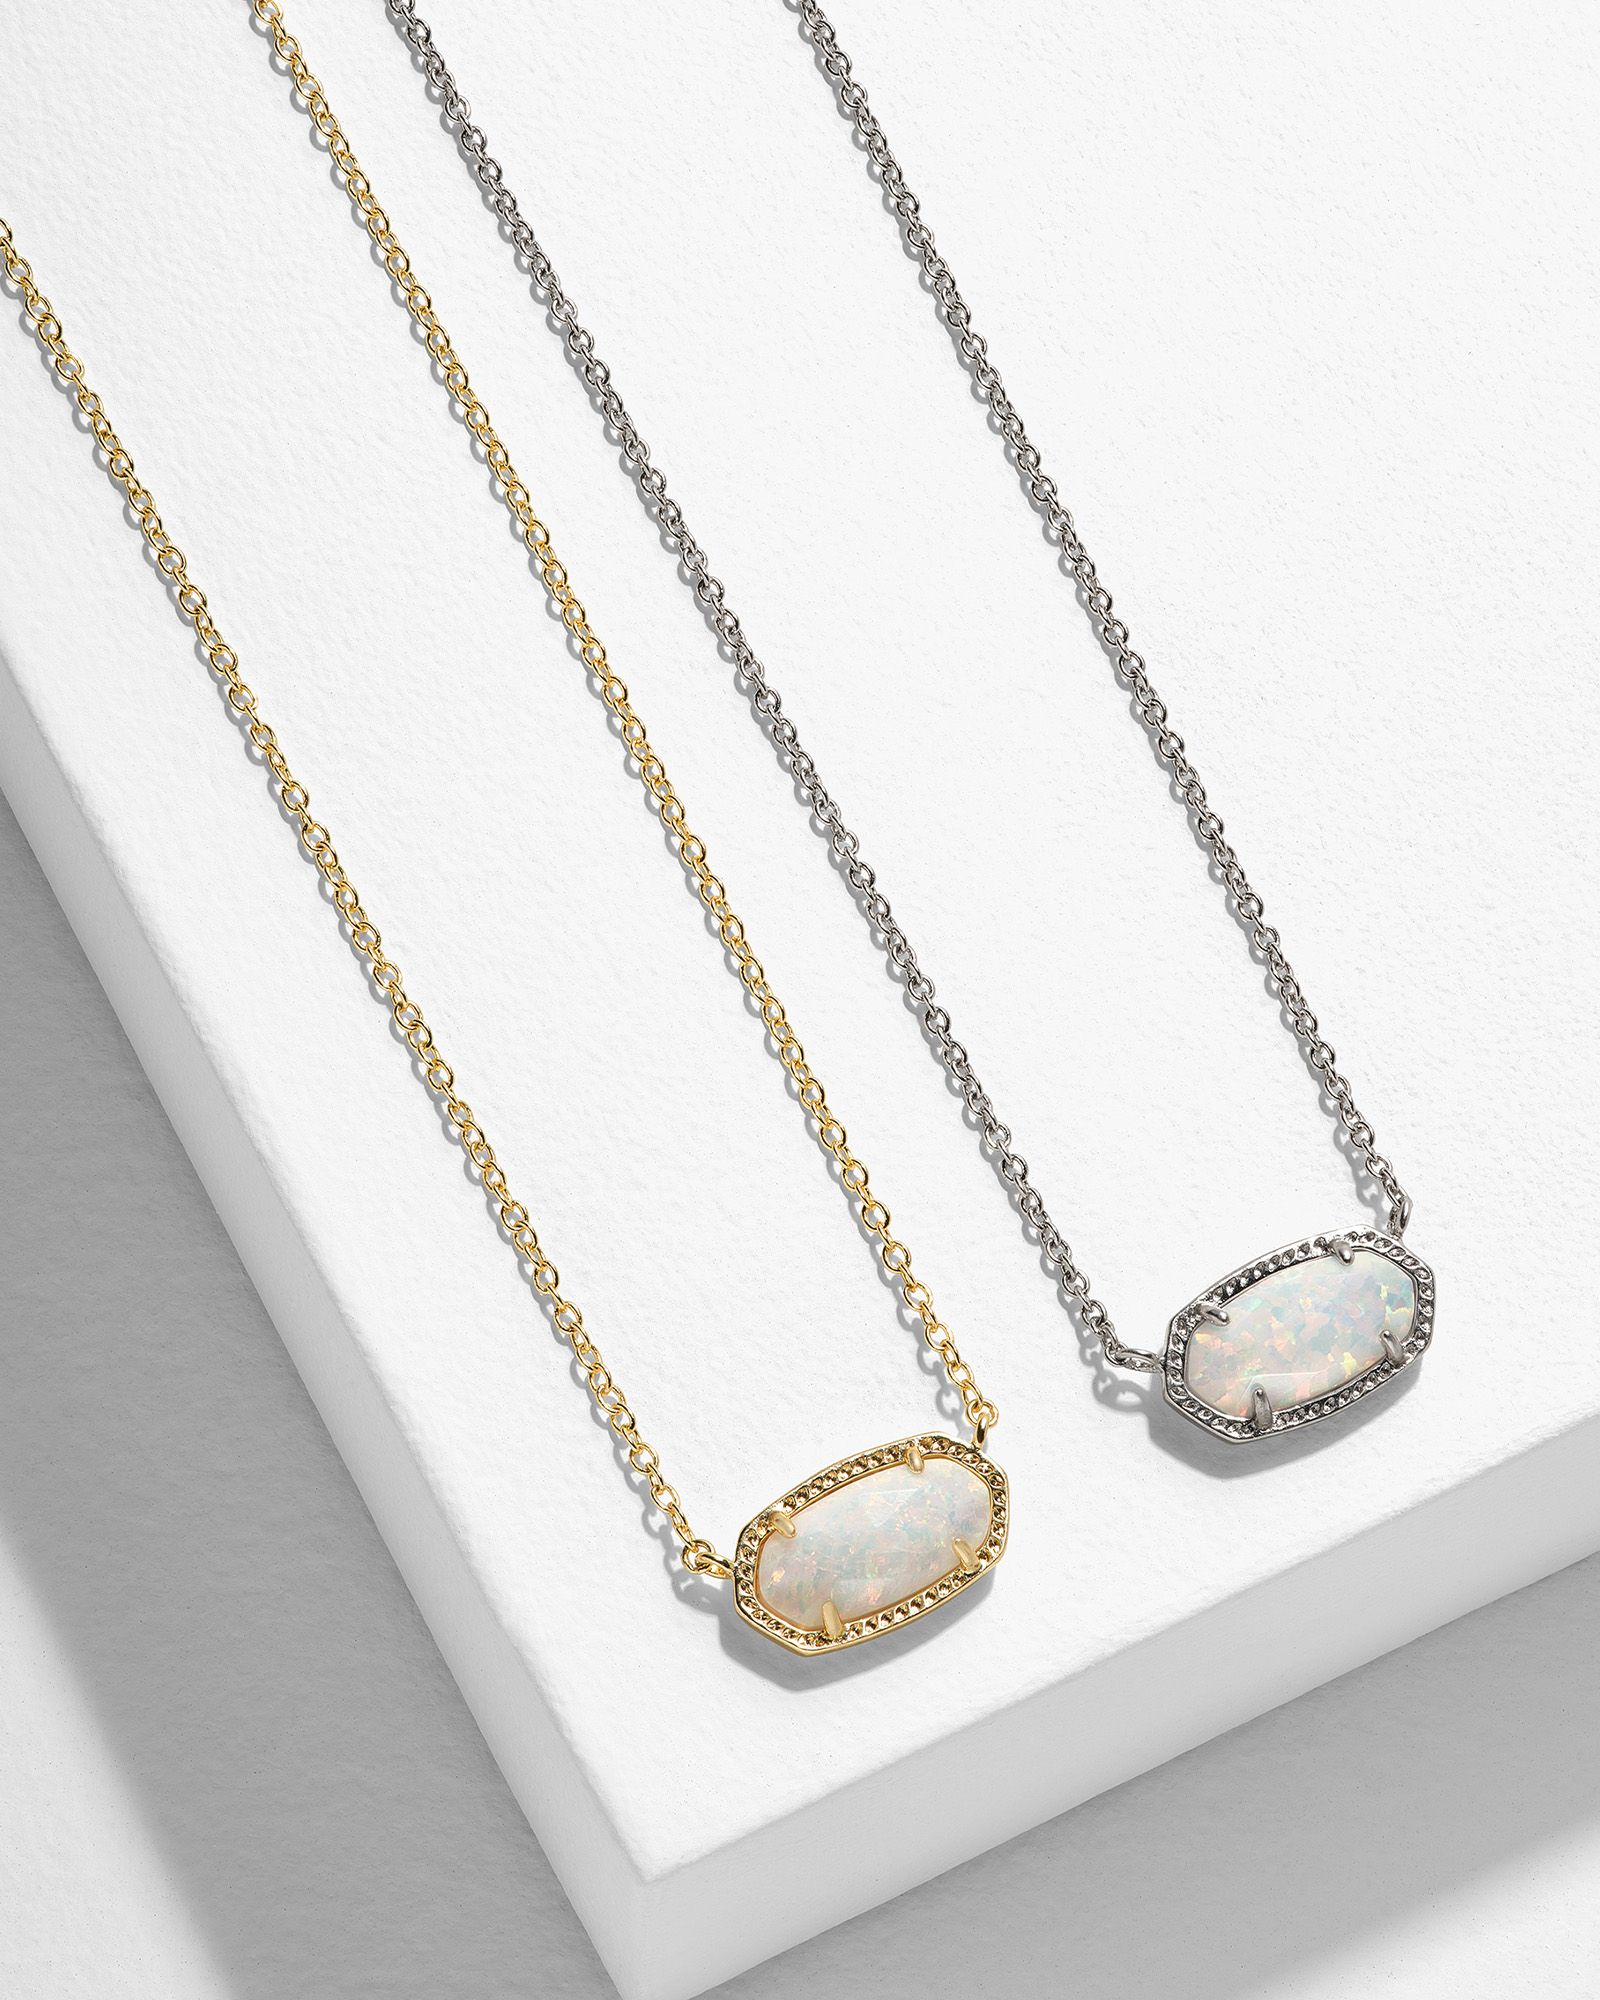 Elisa Pendant Necklace in Gold and Elisa Pendant Necklace in Silver Set | Kendra Scott